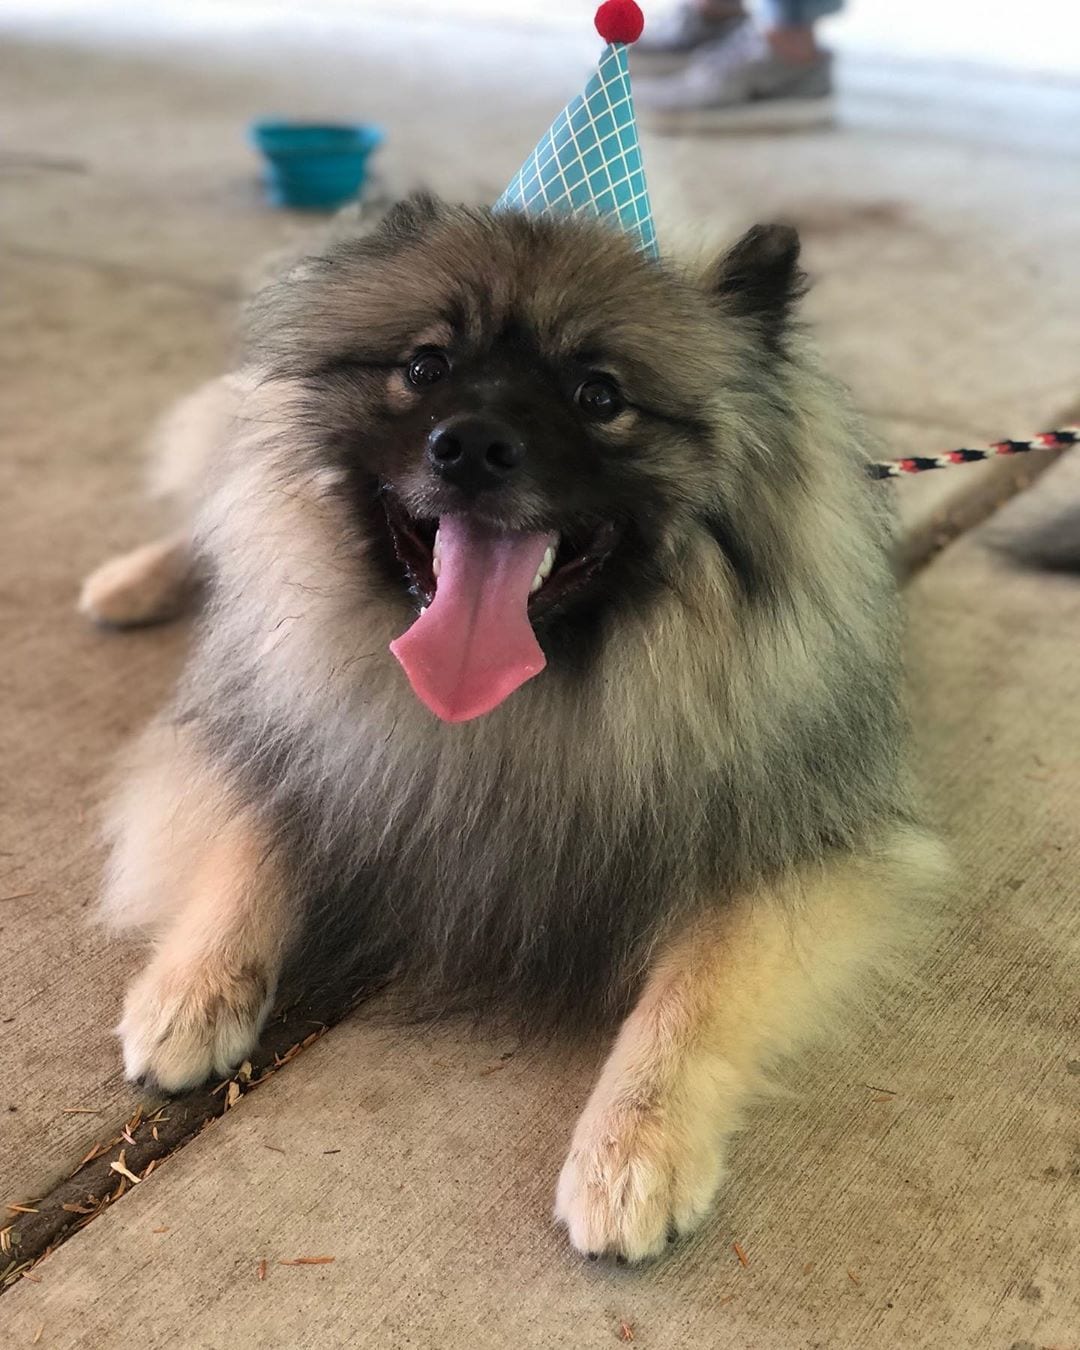 A Keeshond lying on the pavement while sticking its tongue out